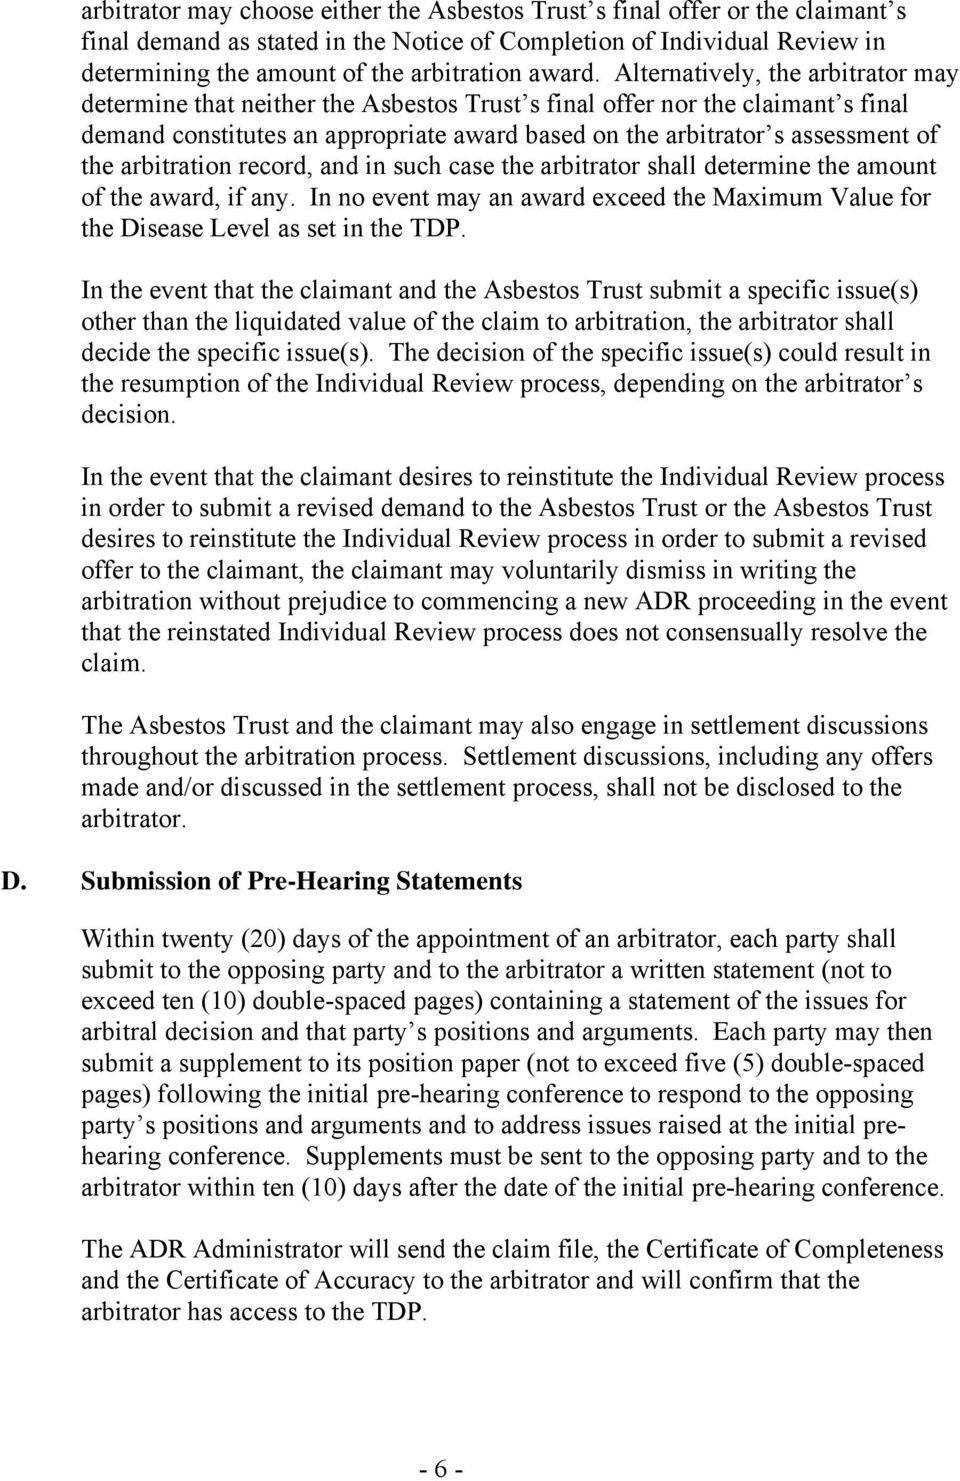 Alternatively, the arbitrator may determine that neither the Asbestos Trust s final offer nor the claimant s final demand constitutes an appropriate award based on the arbitrator s assessment of the